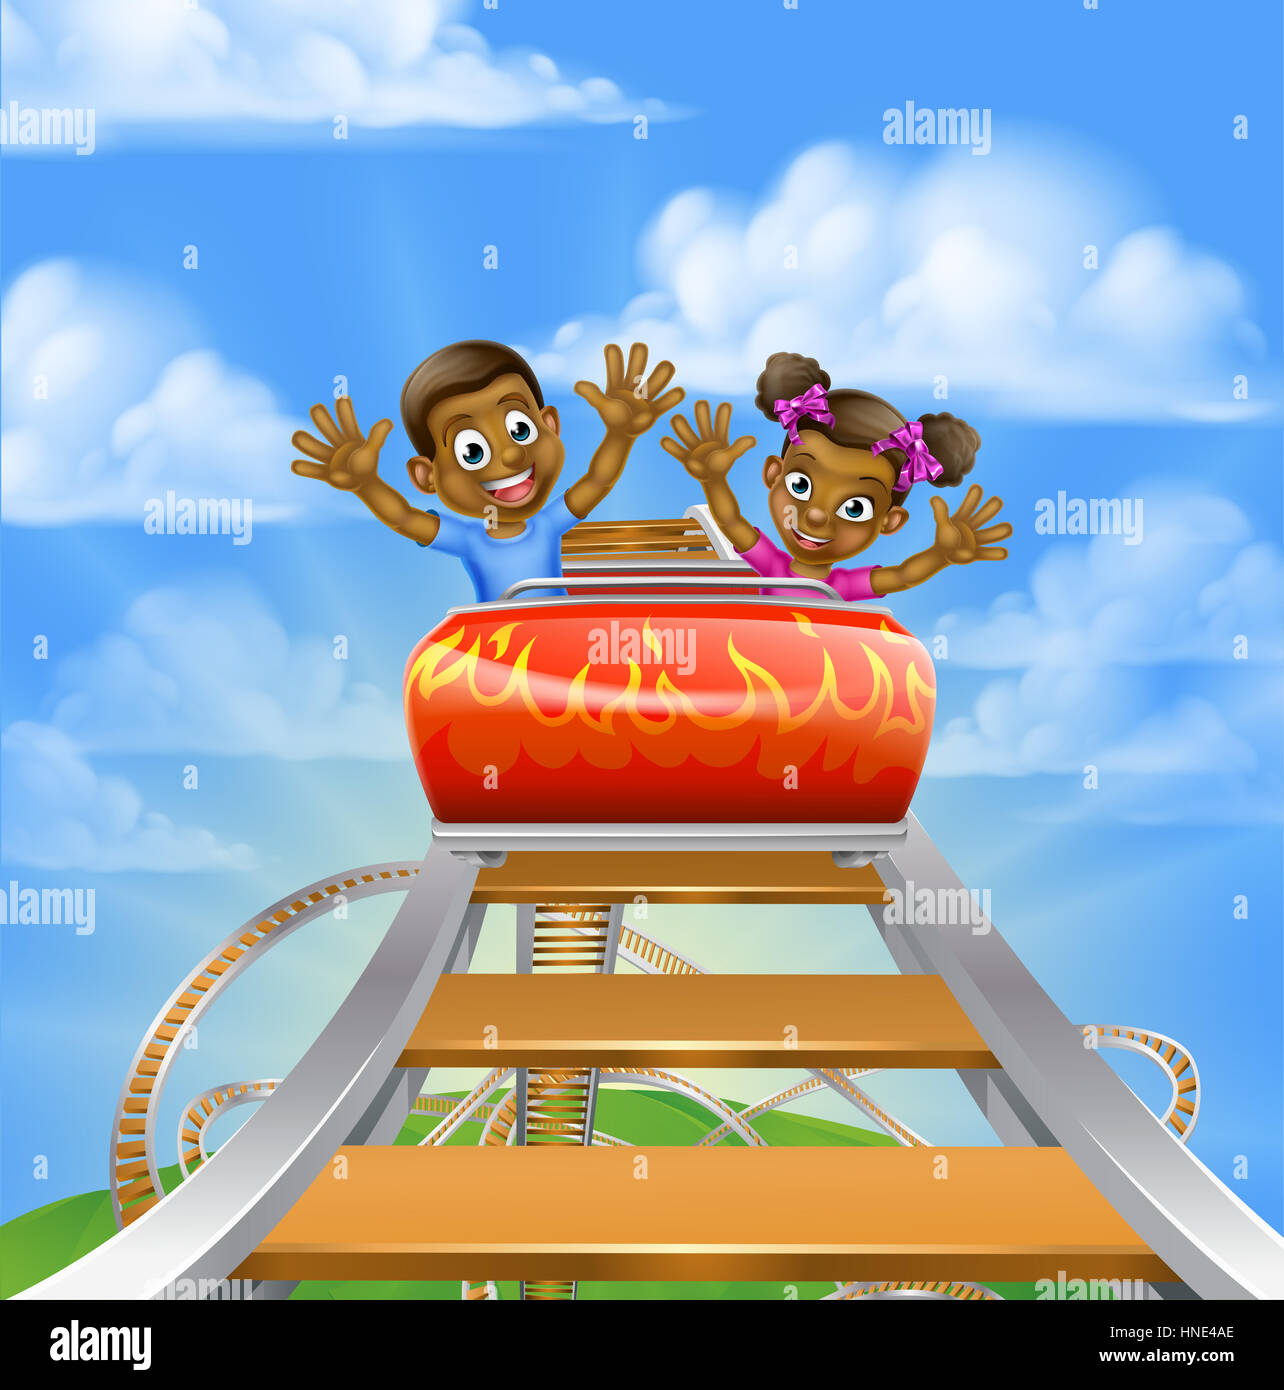 Cartoon children riding on a roller coaster ride at a theme park or amusement park Stock Photo